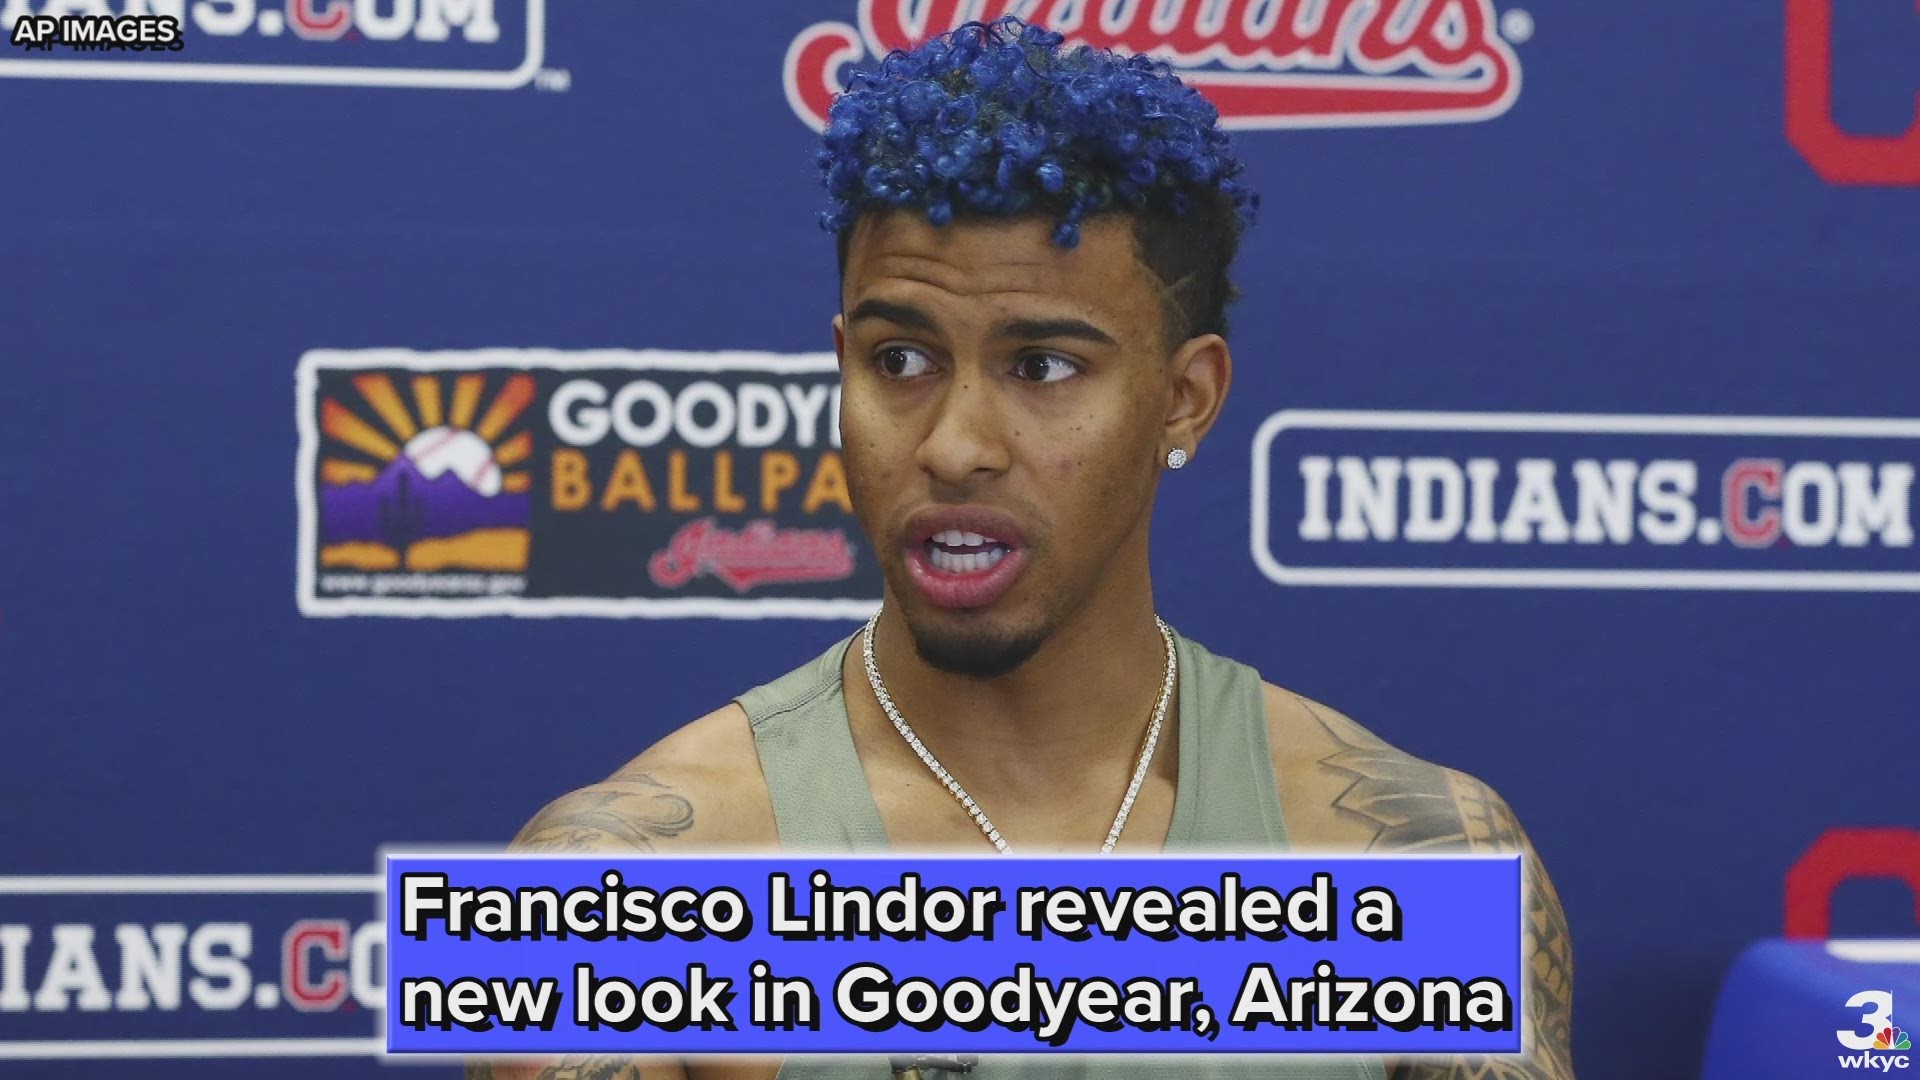 On Monday, Cleveland Indians shortstop Francisco Lindor revealed a new look in Goodyear, Arizona.